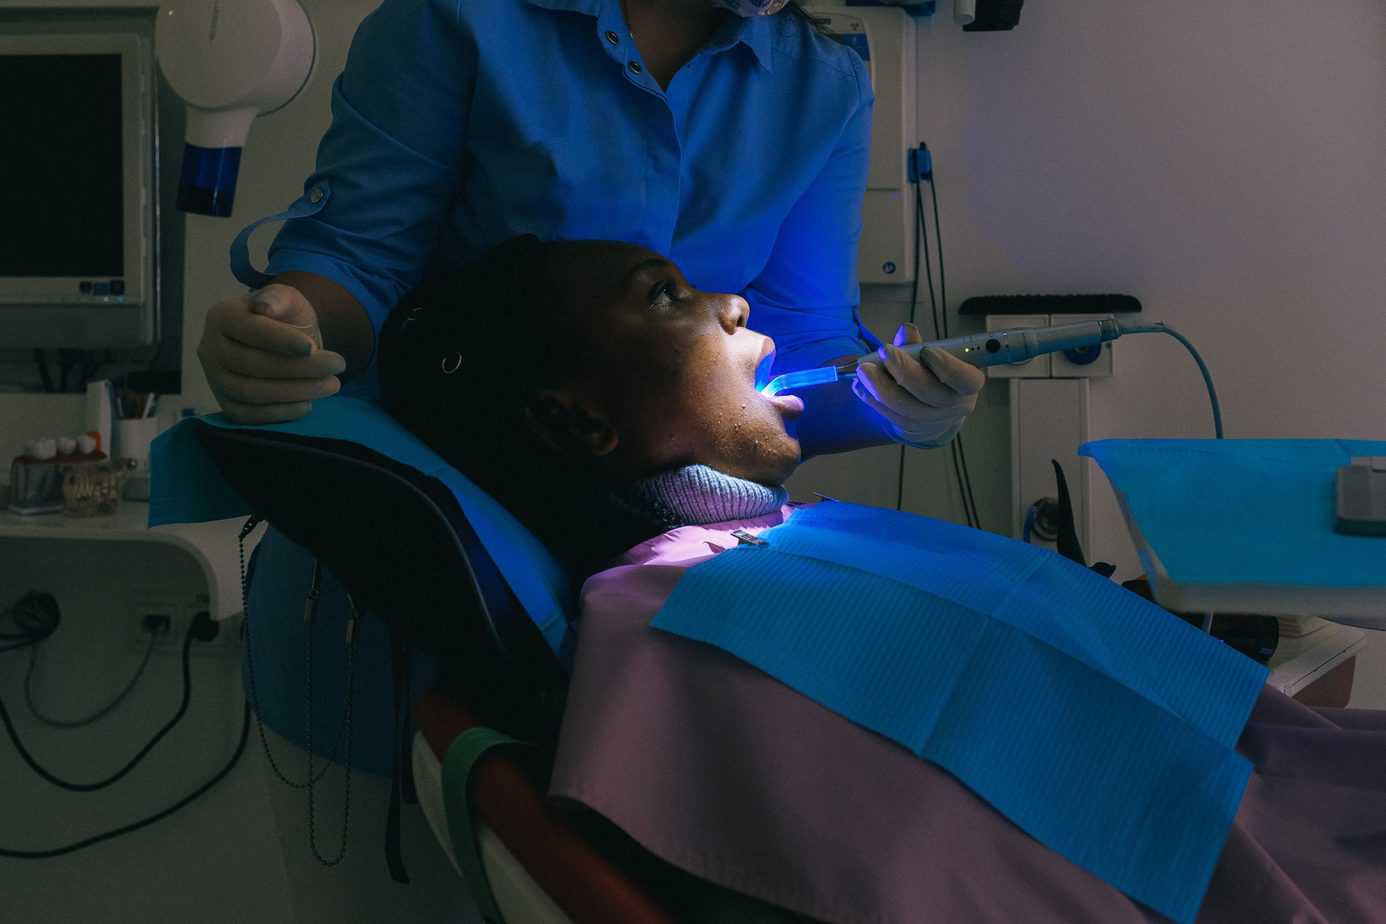 What do regular visits to the dentist provide?